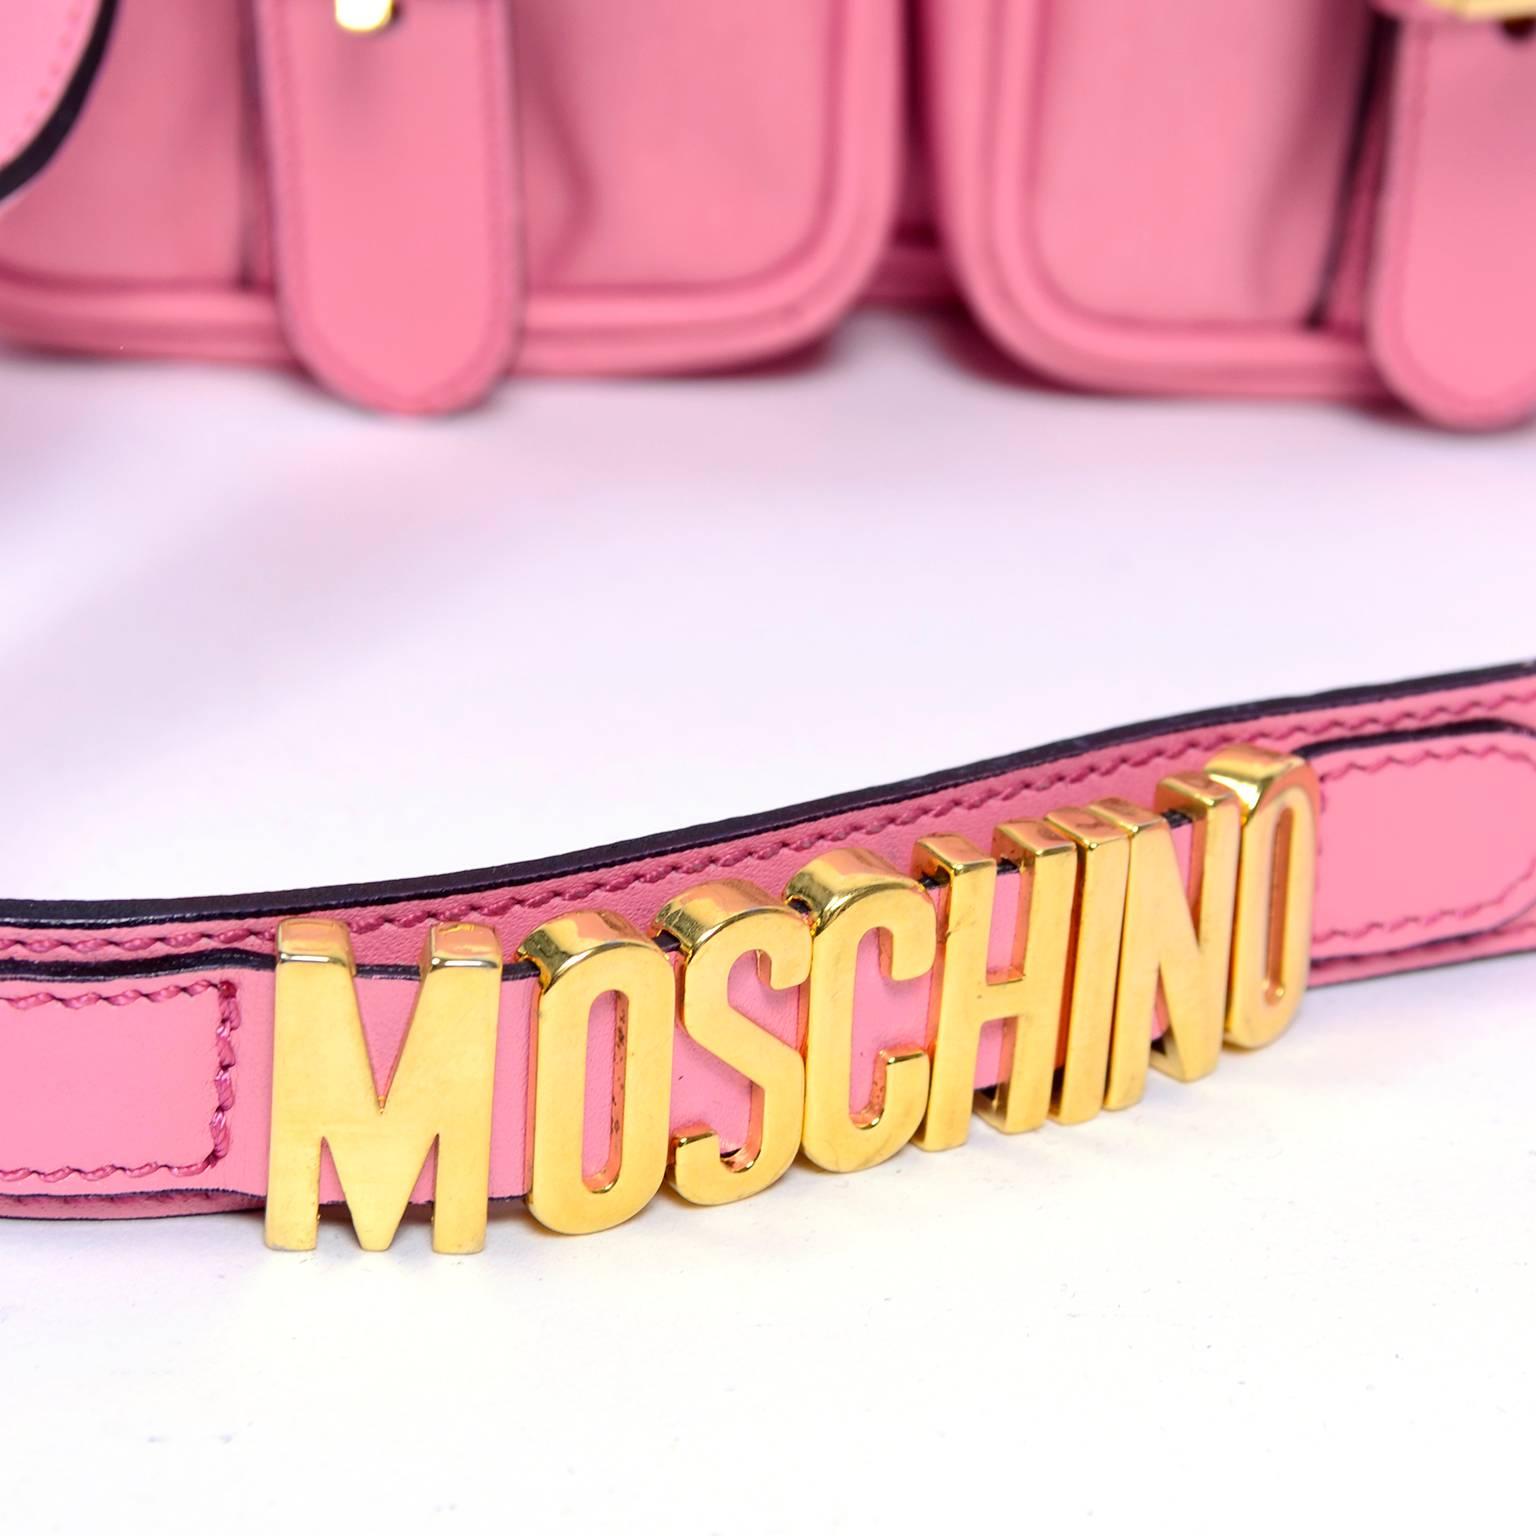 This is an iconic pink Moschino handbag with gold hardware. The top flap comes over to snap over the two front pockets, with faux buckles on the front, for a school satchel look. This nylon bag is lined with black logo fabric. The strap is